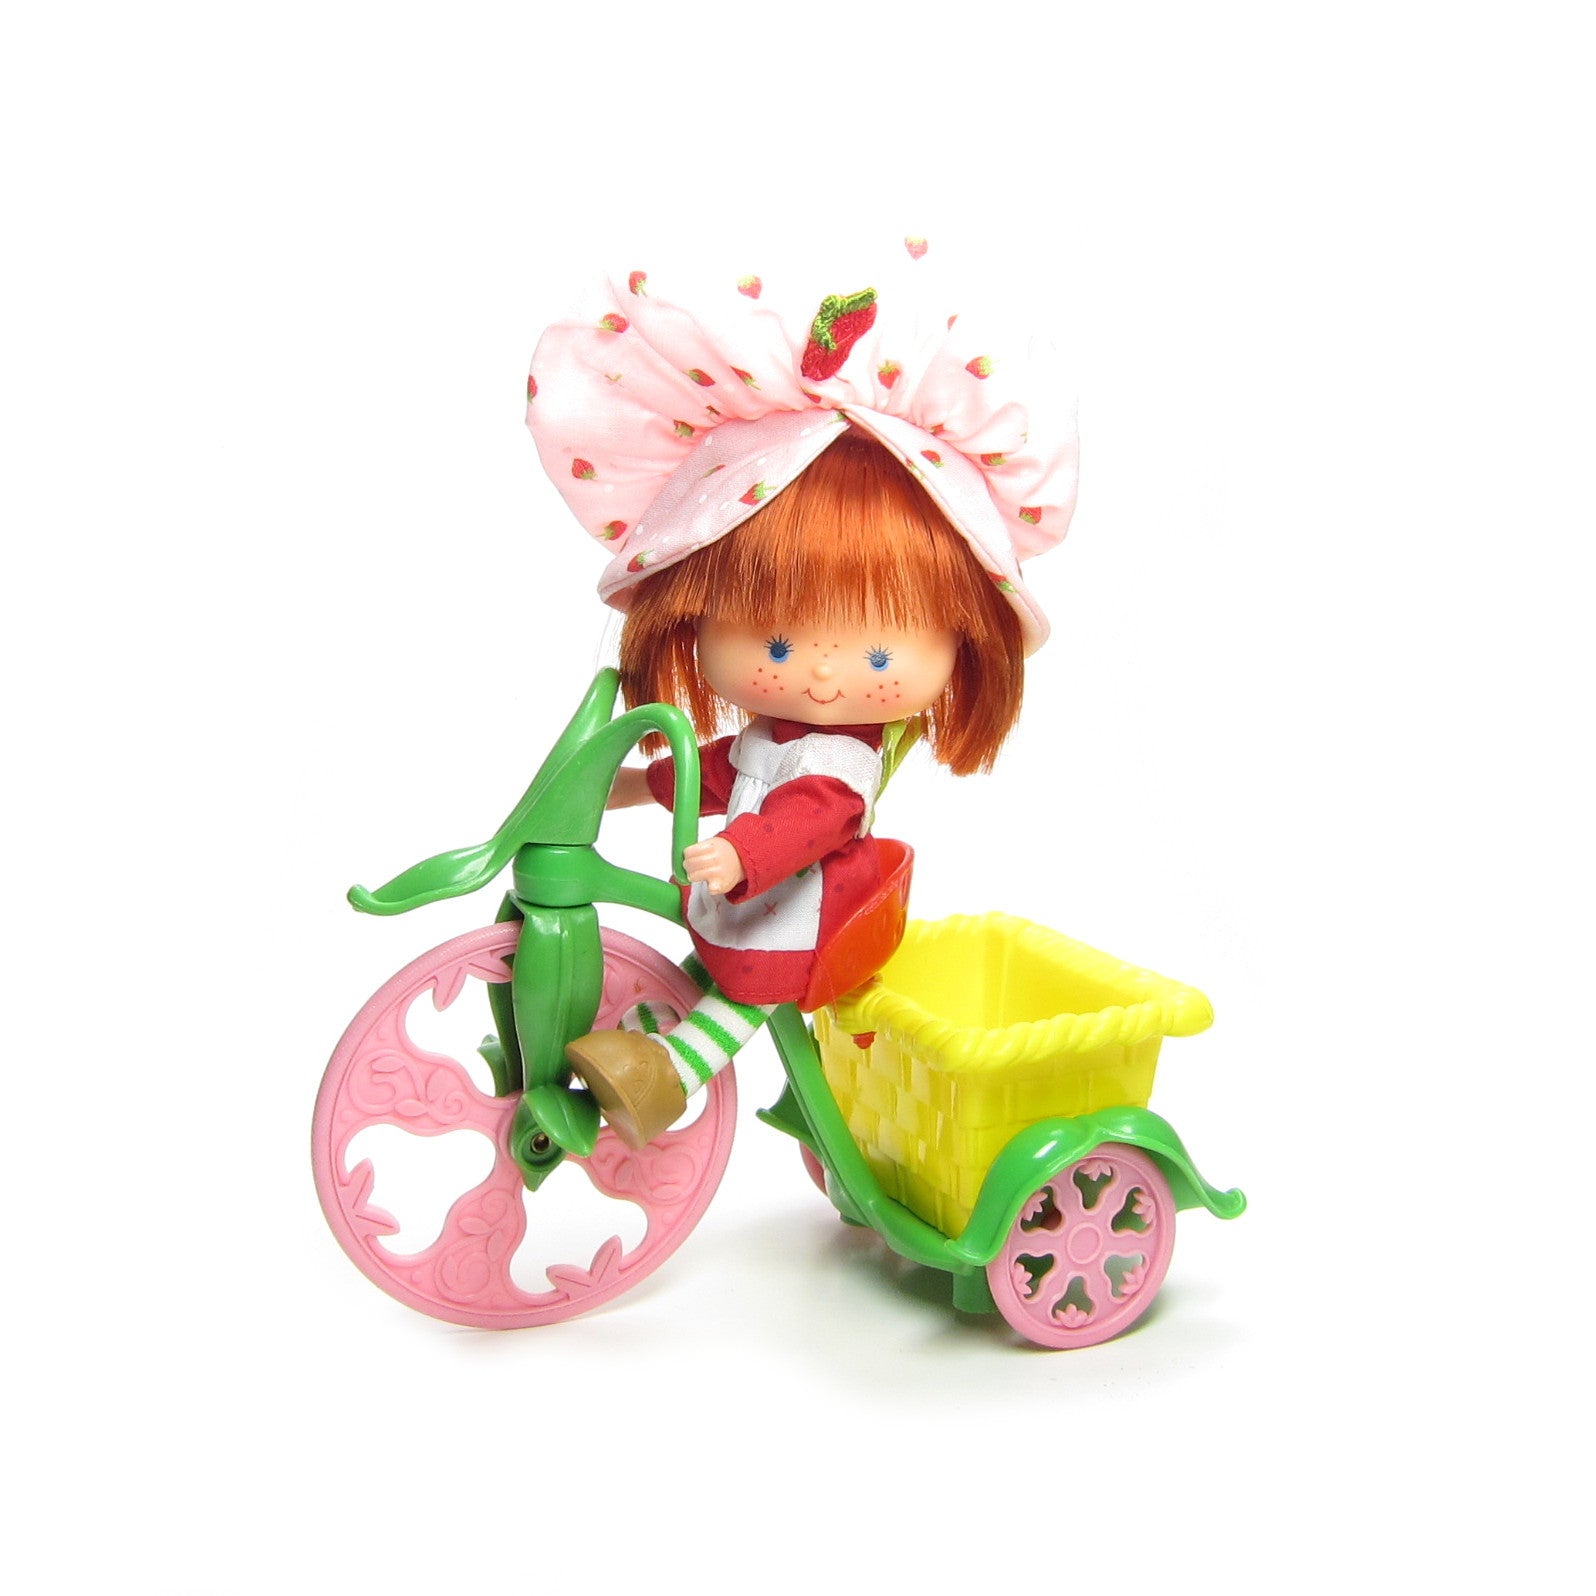 Strawberry Shortcake tricycle toy for dolls